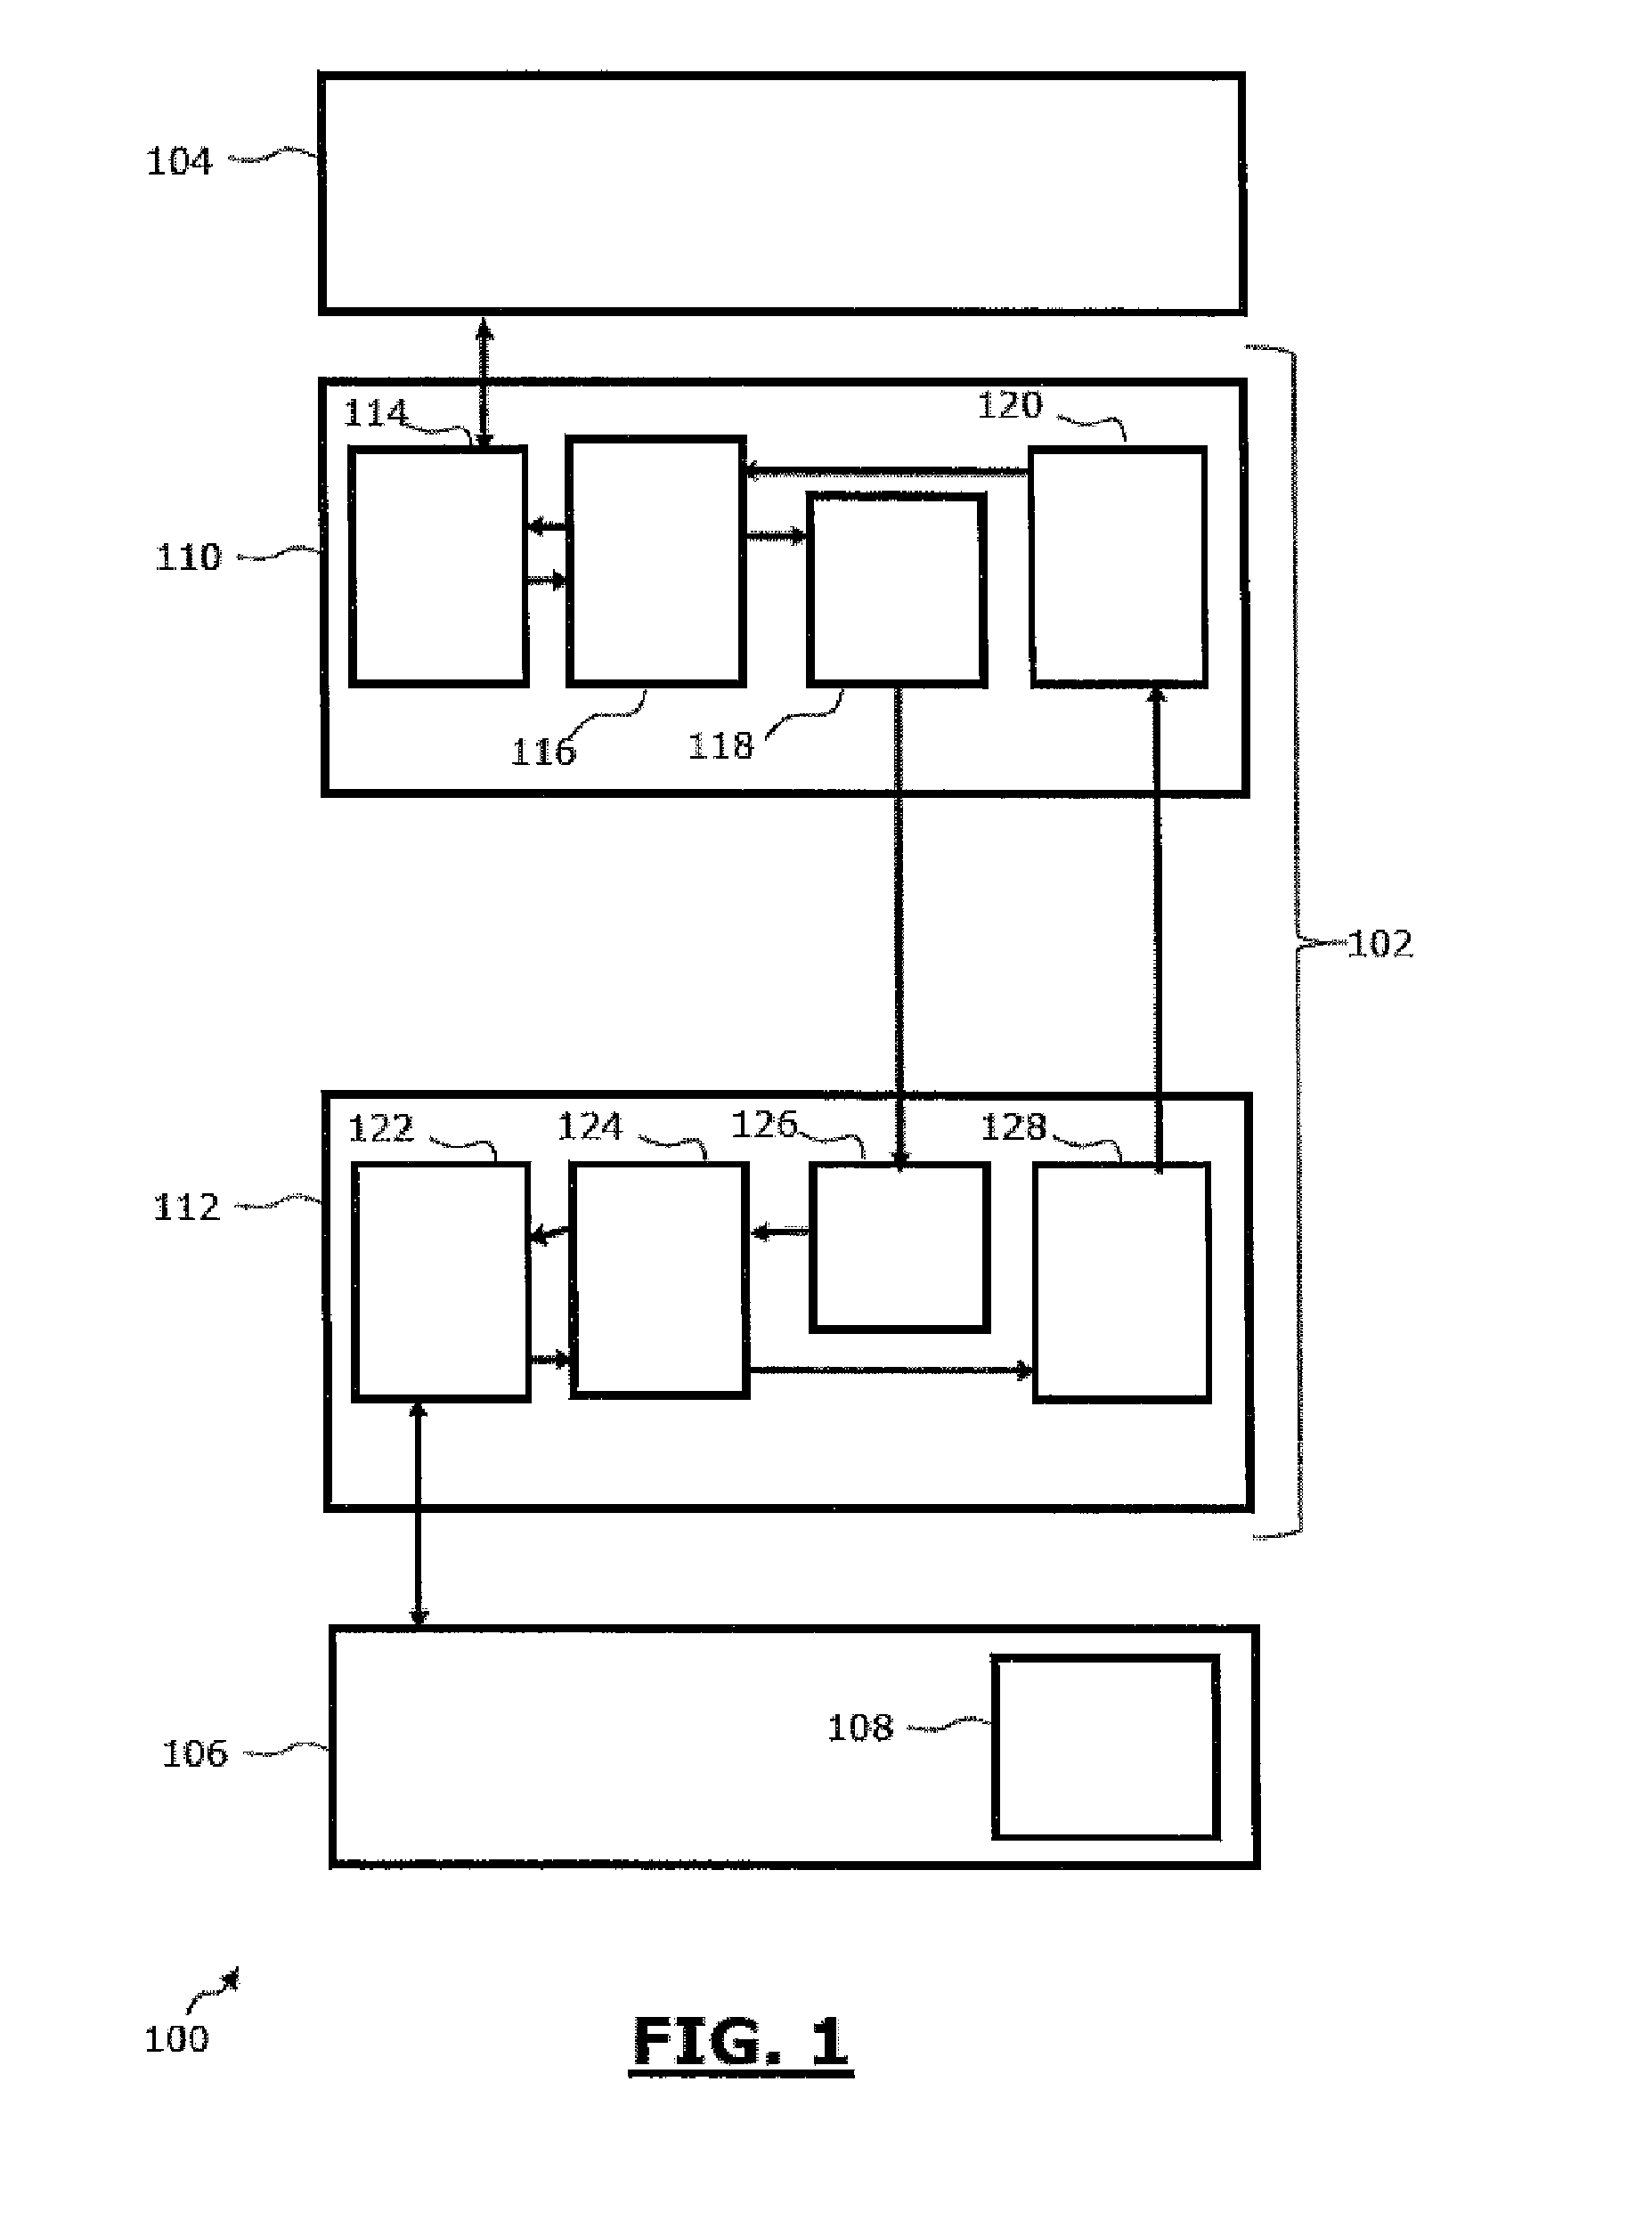 Method and device for controlling at least one apparatus by at least one other apparatus, system implementing such a device